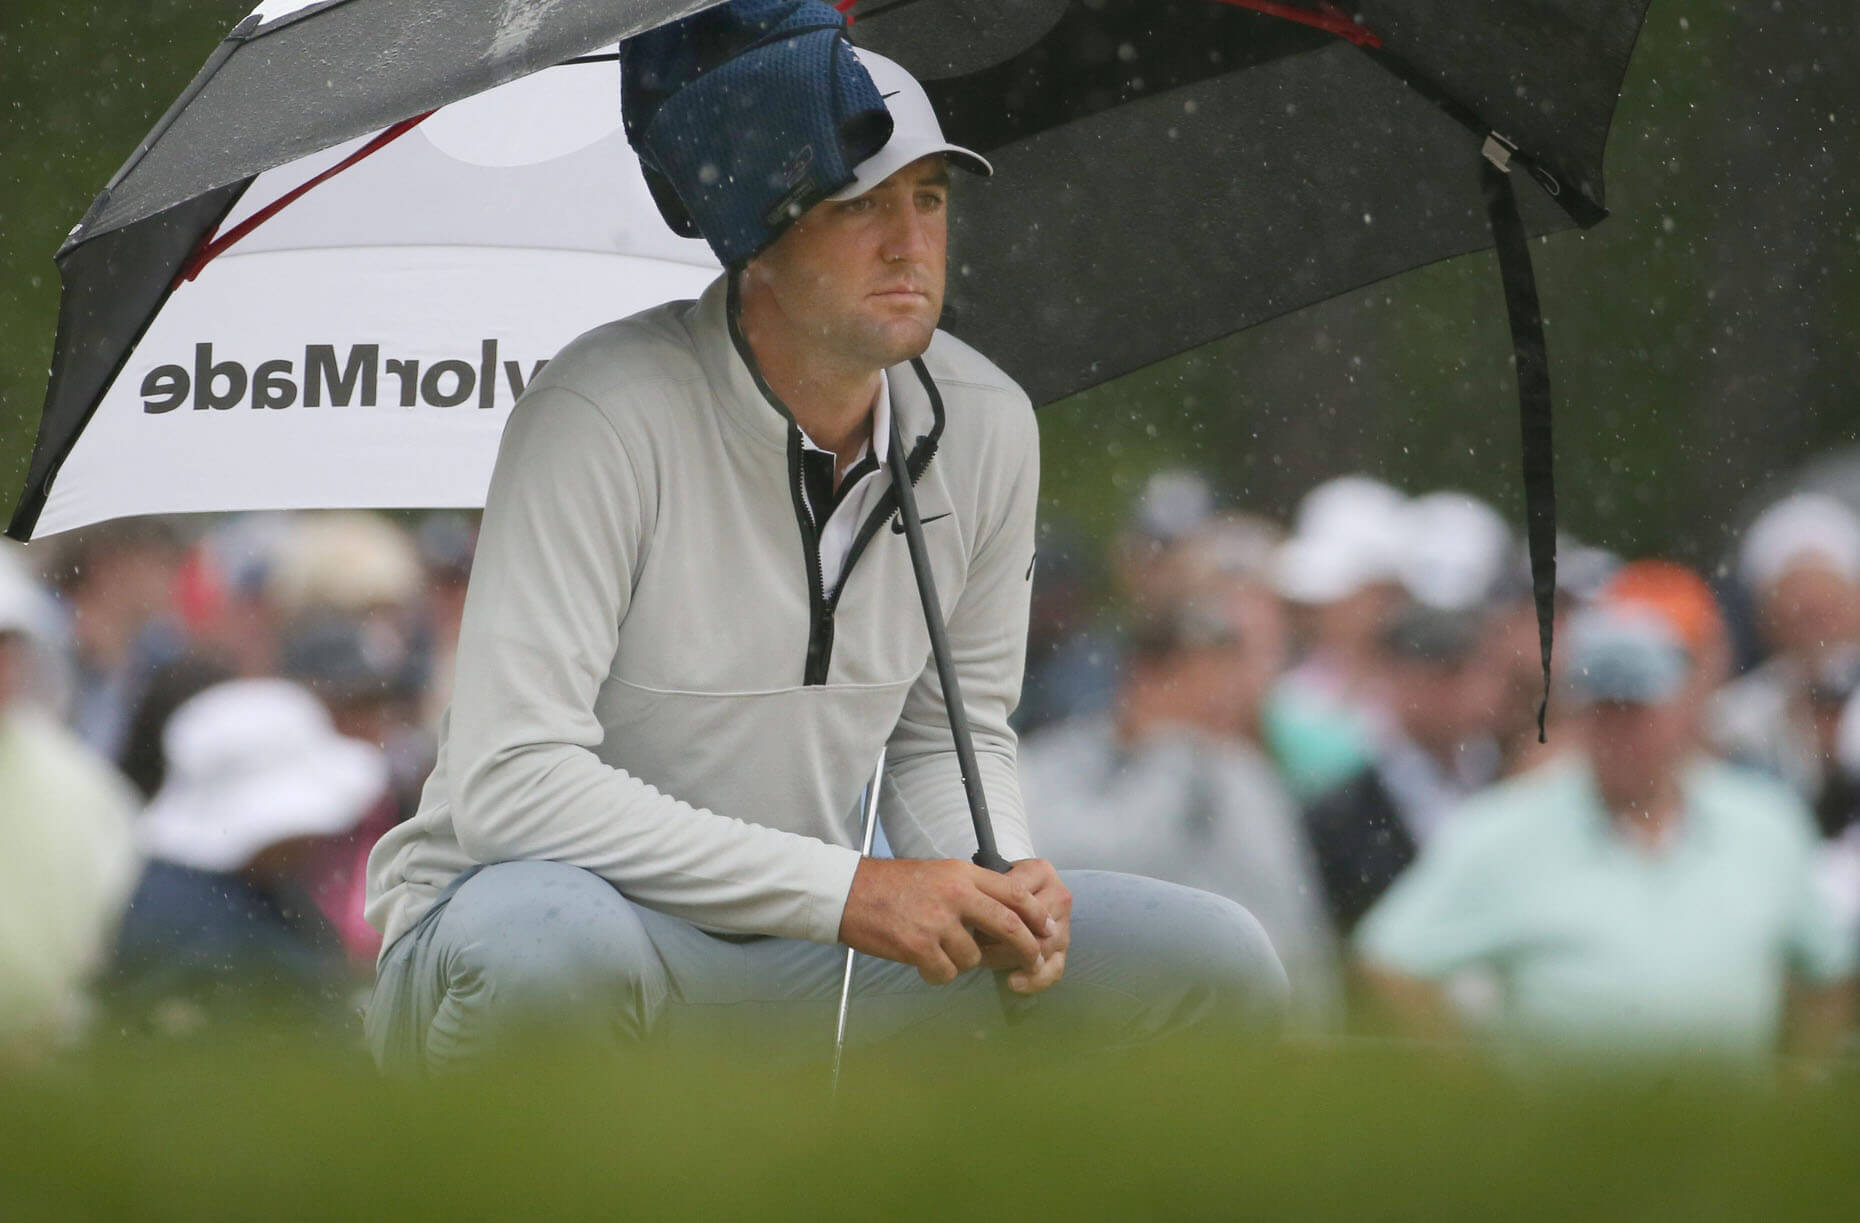 How To Bet - PGA Championship Weather: Thunderstorms a Risk for Round 2